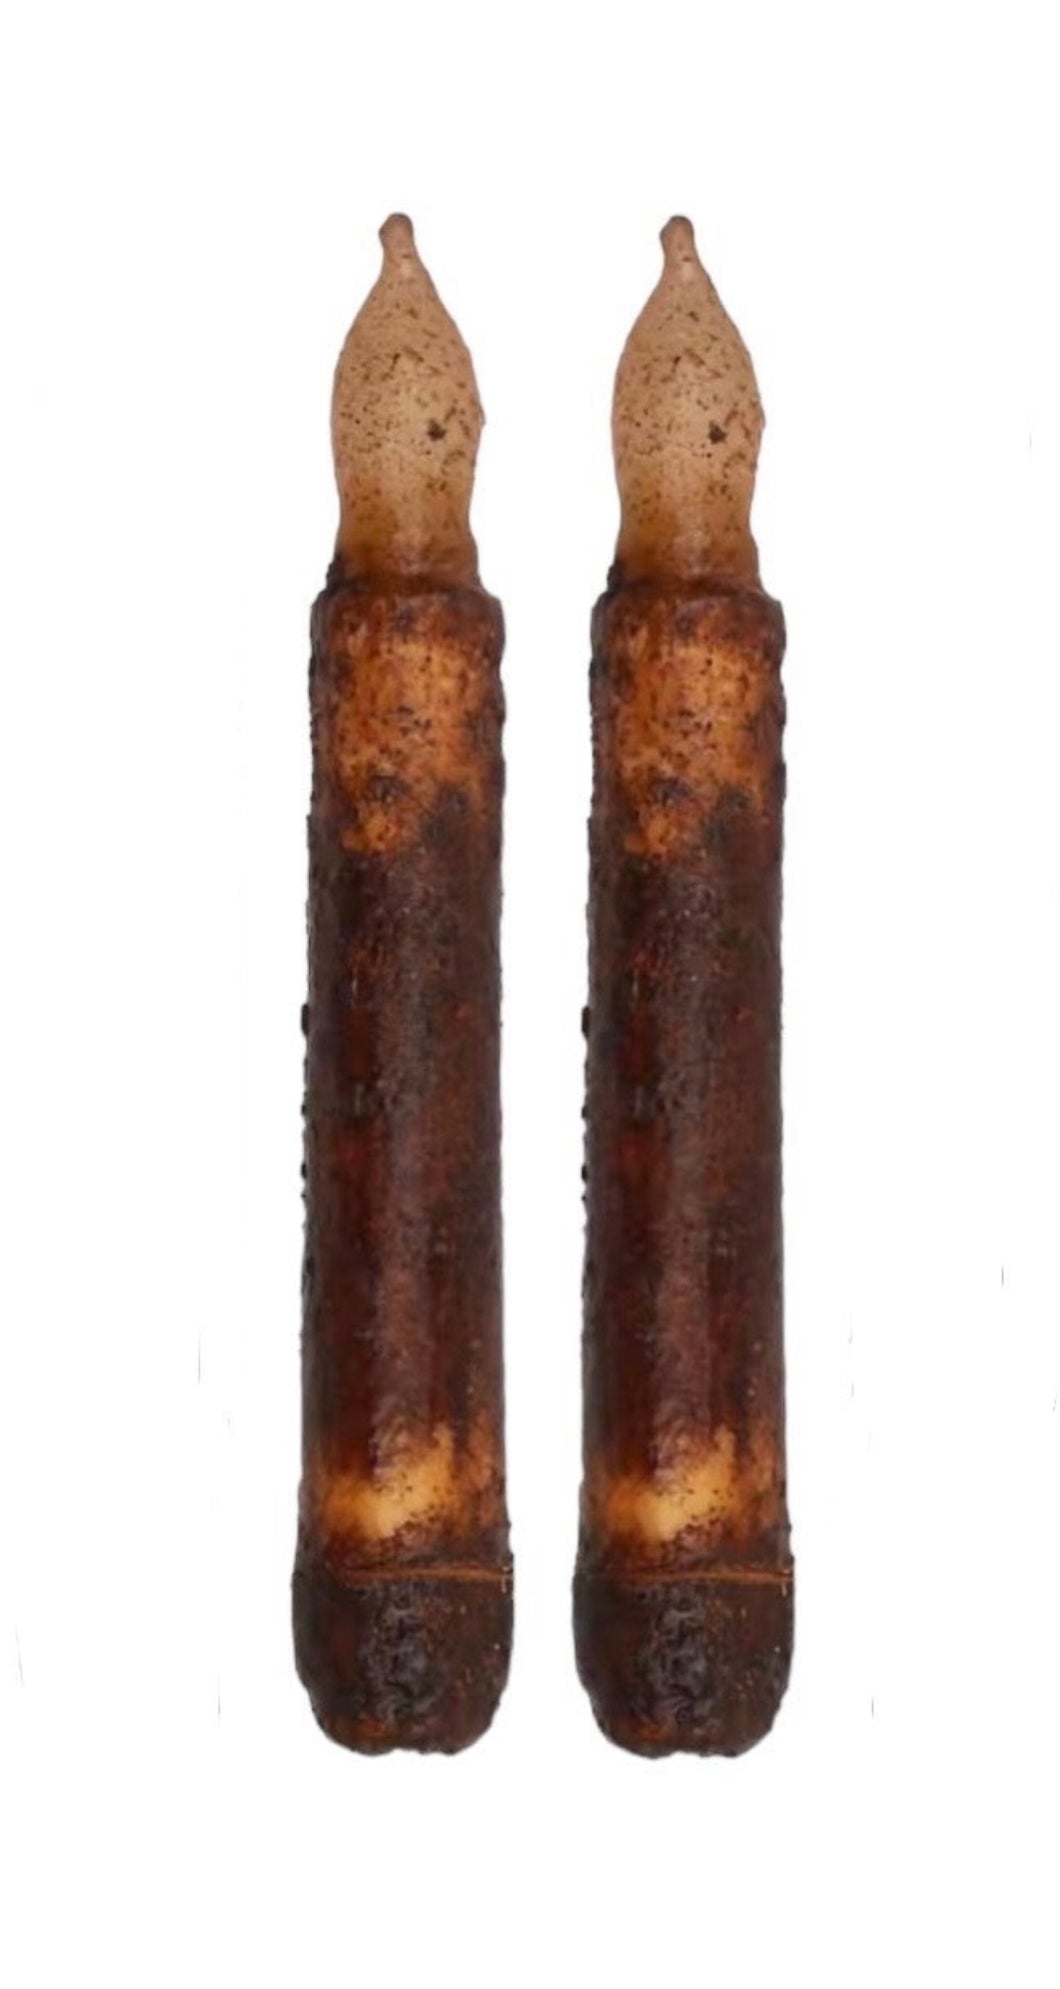 Real Wax Taper Candle Set of 2